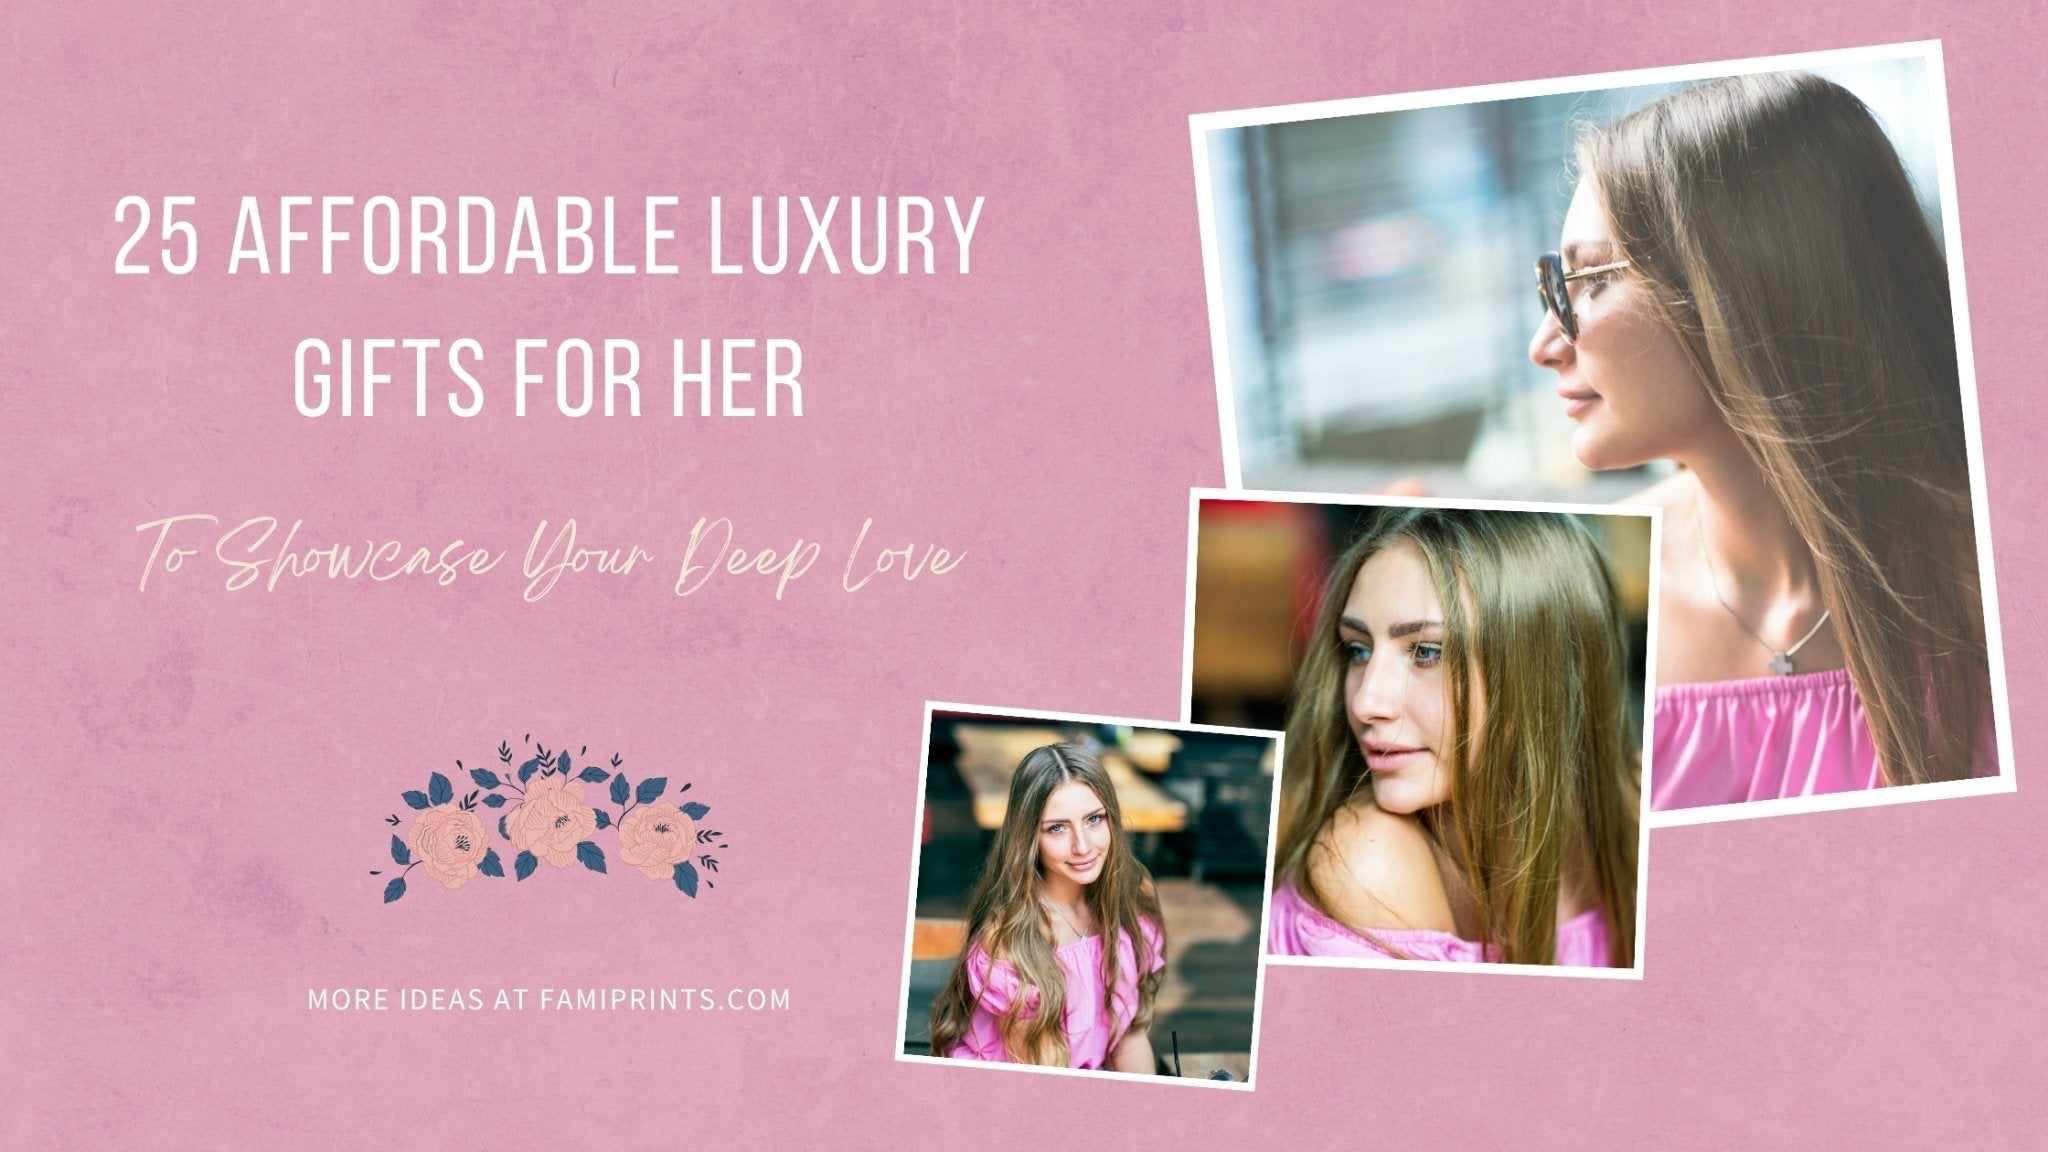 25 Affordable Luxury Gifts For Her To Showcase Your Deep Love - FamiPrints | Trending Customizable Family Gifts